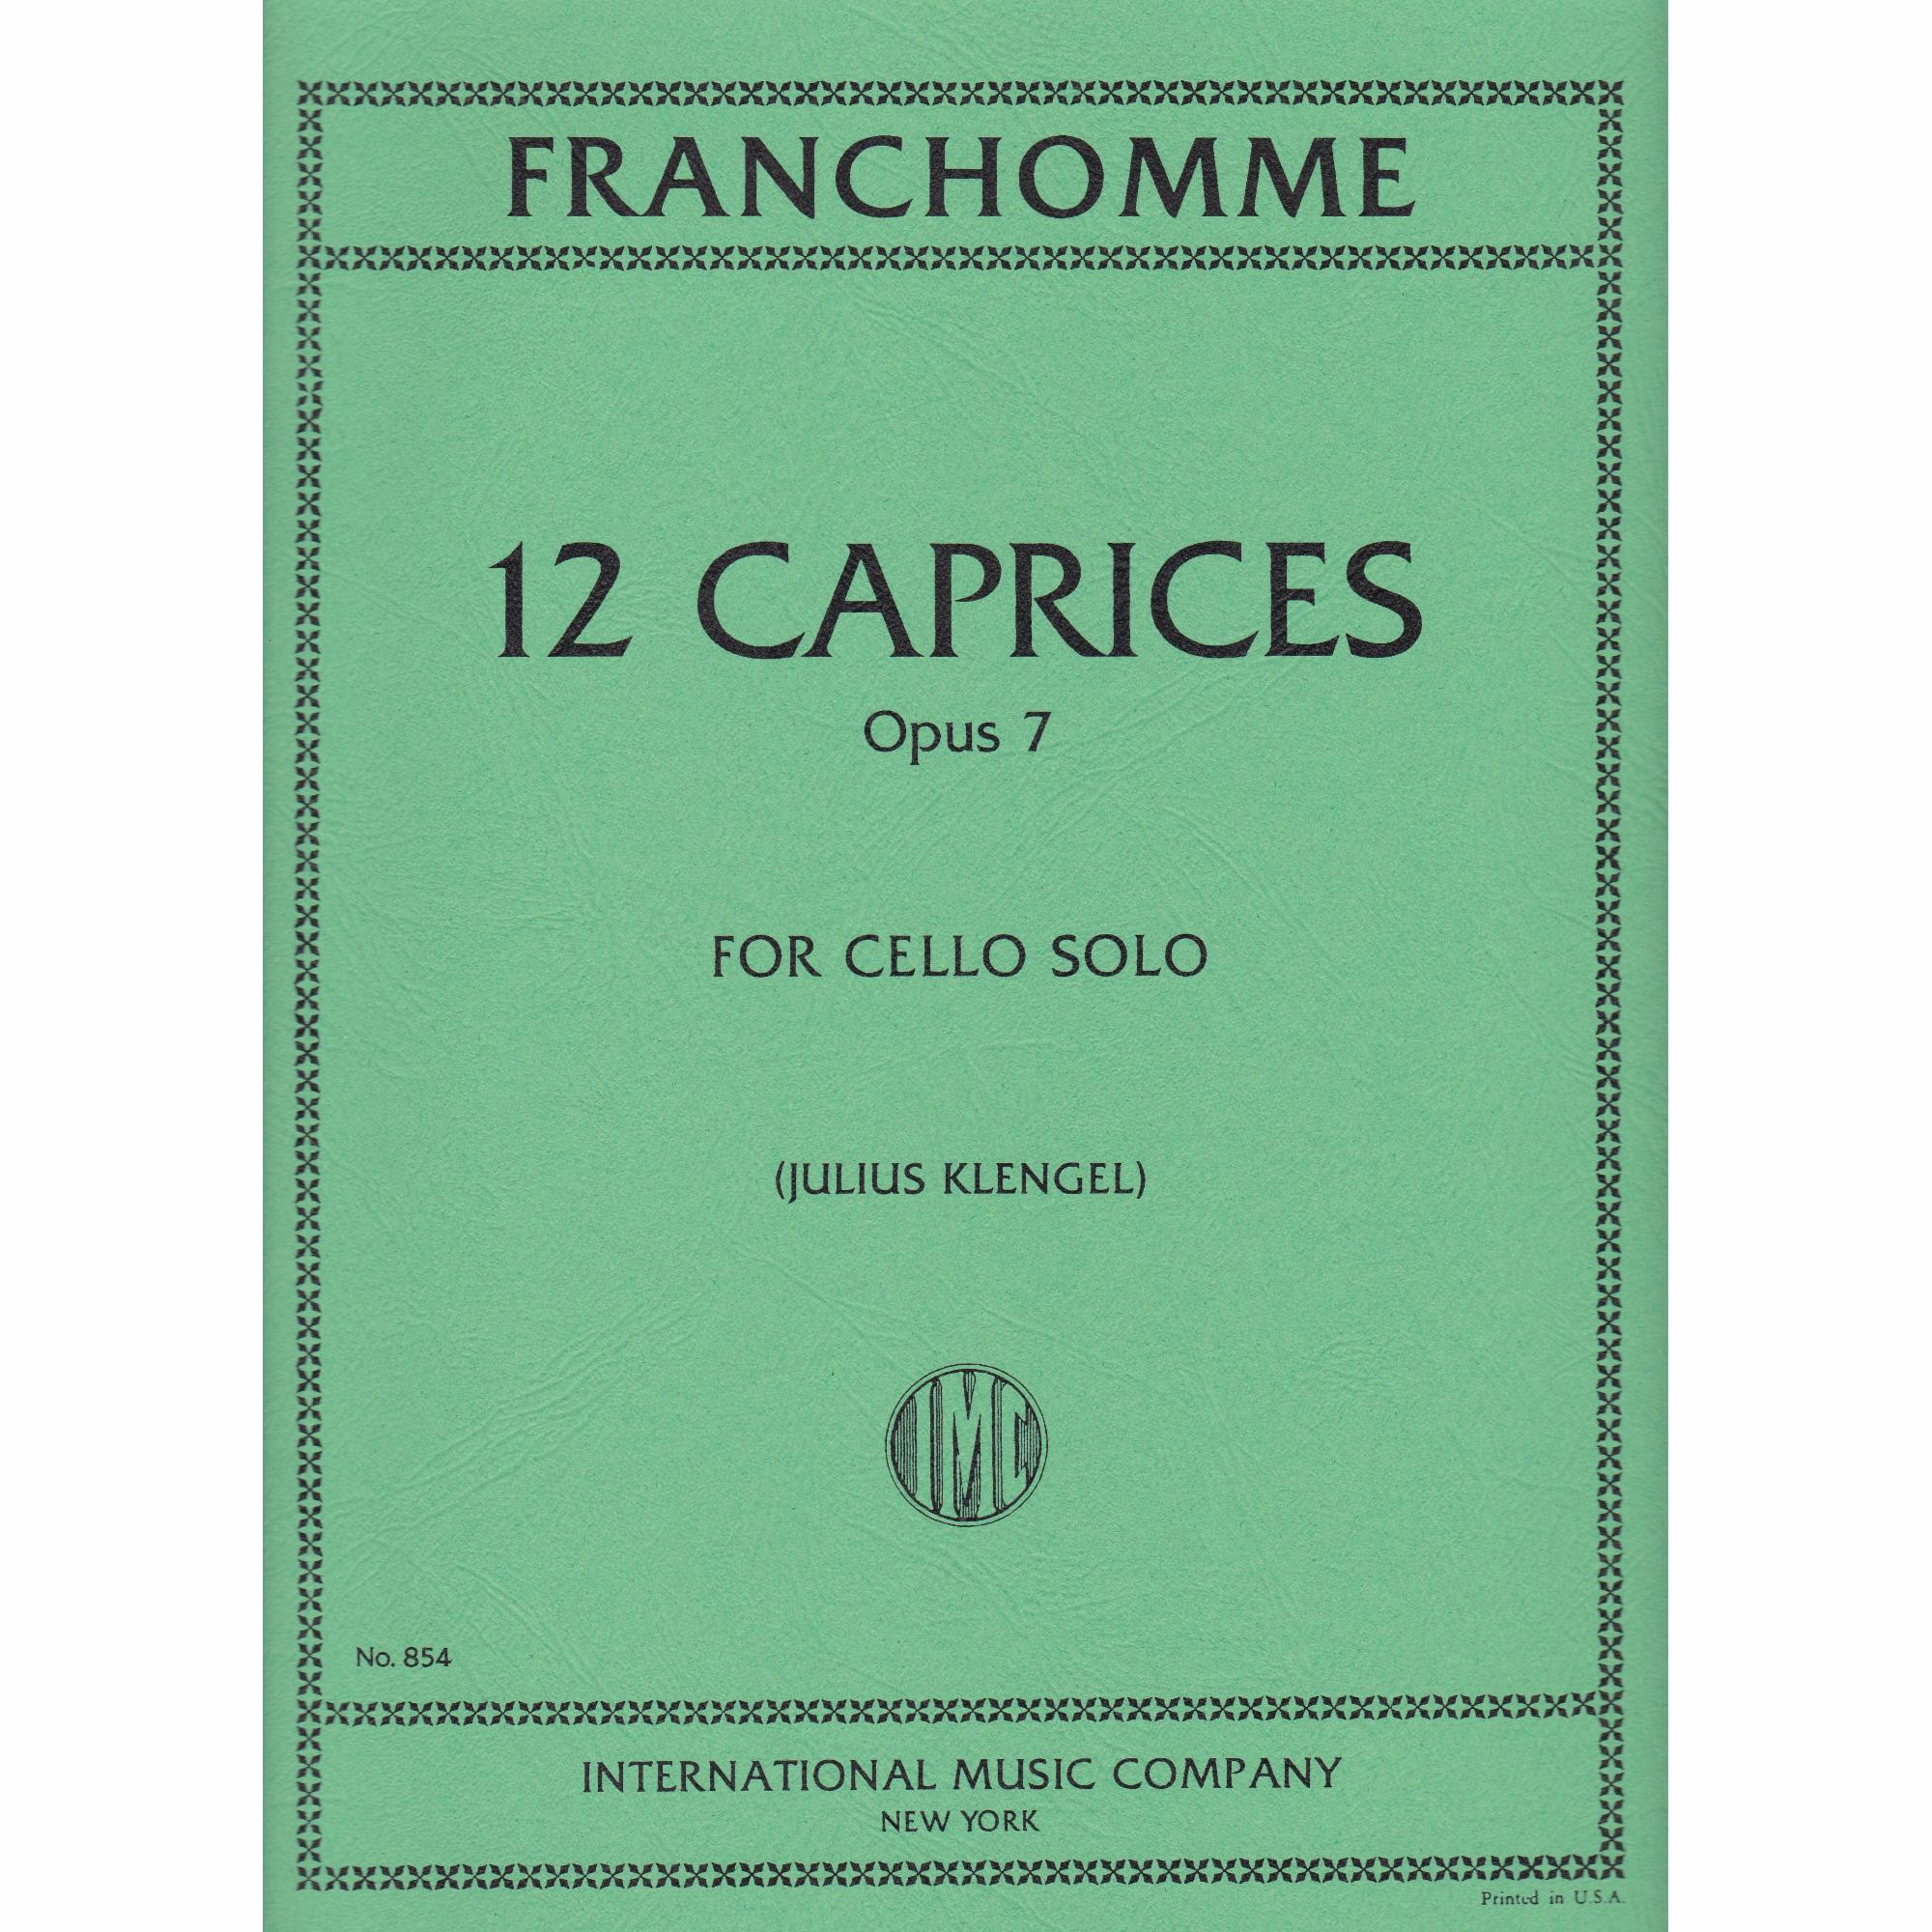 12 Caprices, Op. 7 for Cello Solo